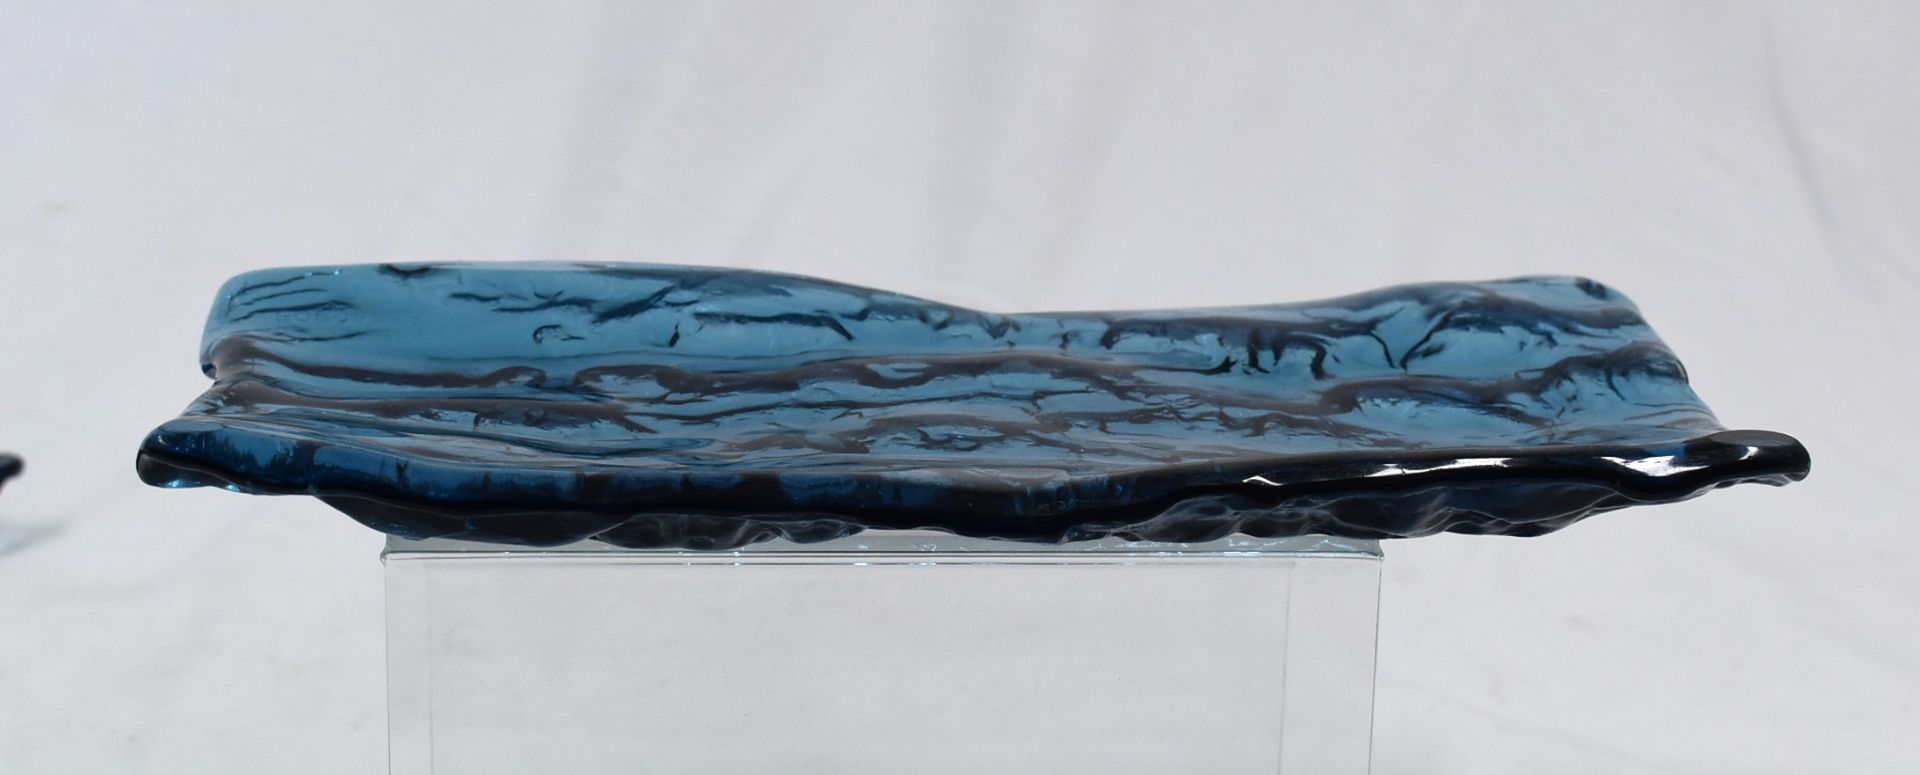 6 x Pordamsa Craft Glass Dinner Trays in Blue - Handcrafted Unique Dinnerware - RRP £240 - 28 x 15 - Image 2 of 11